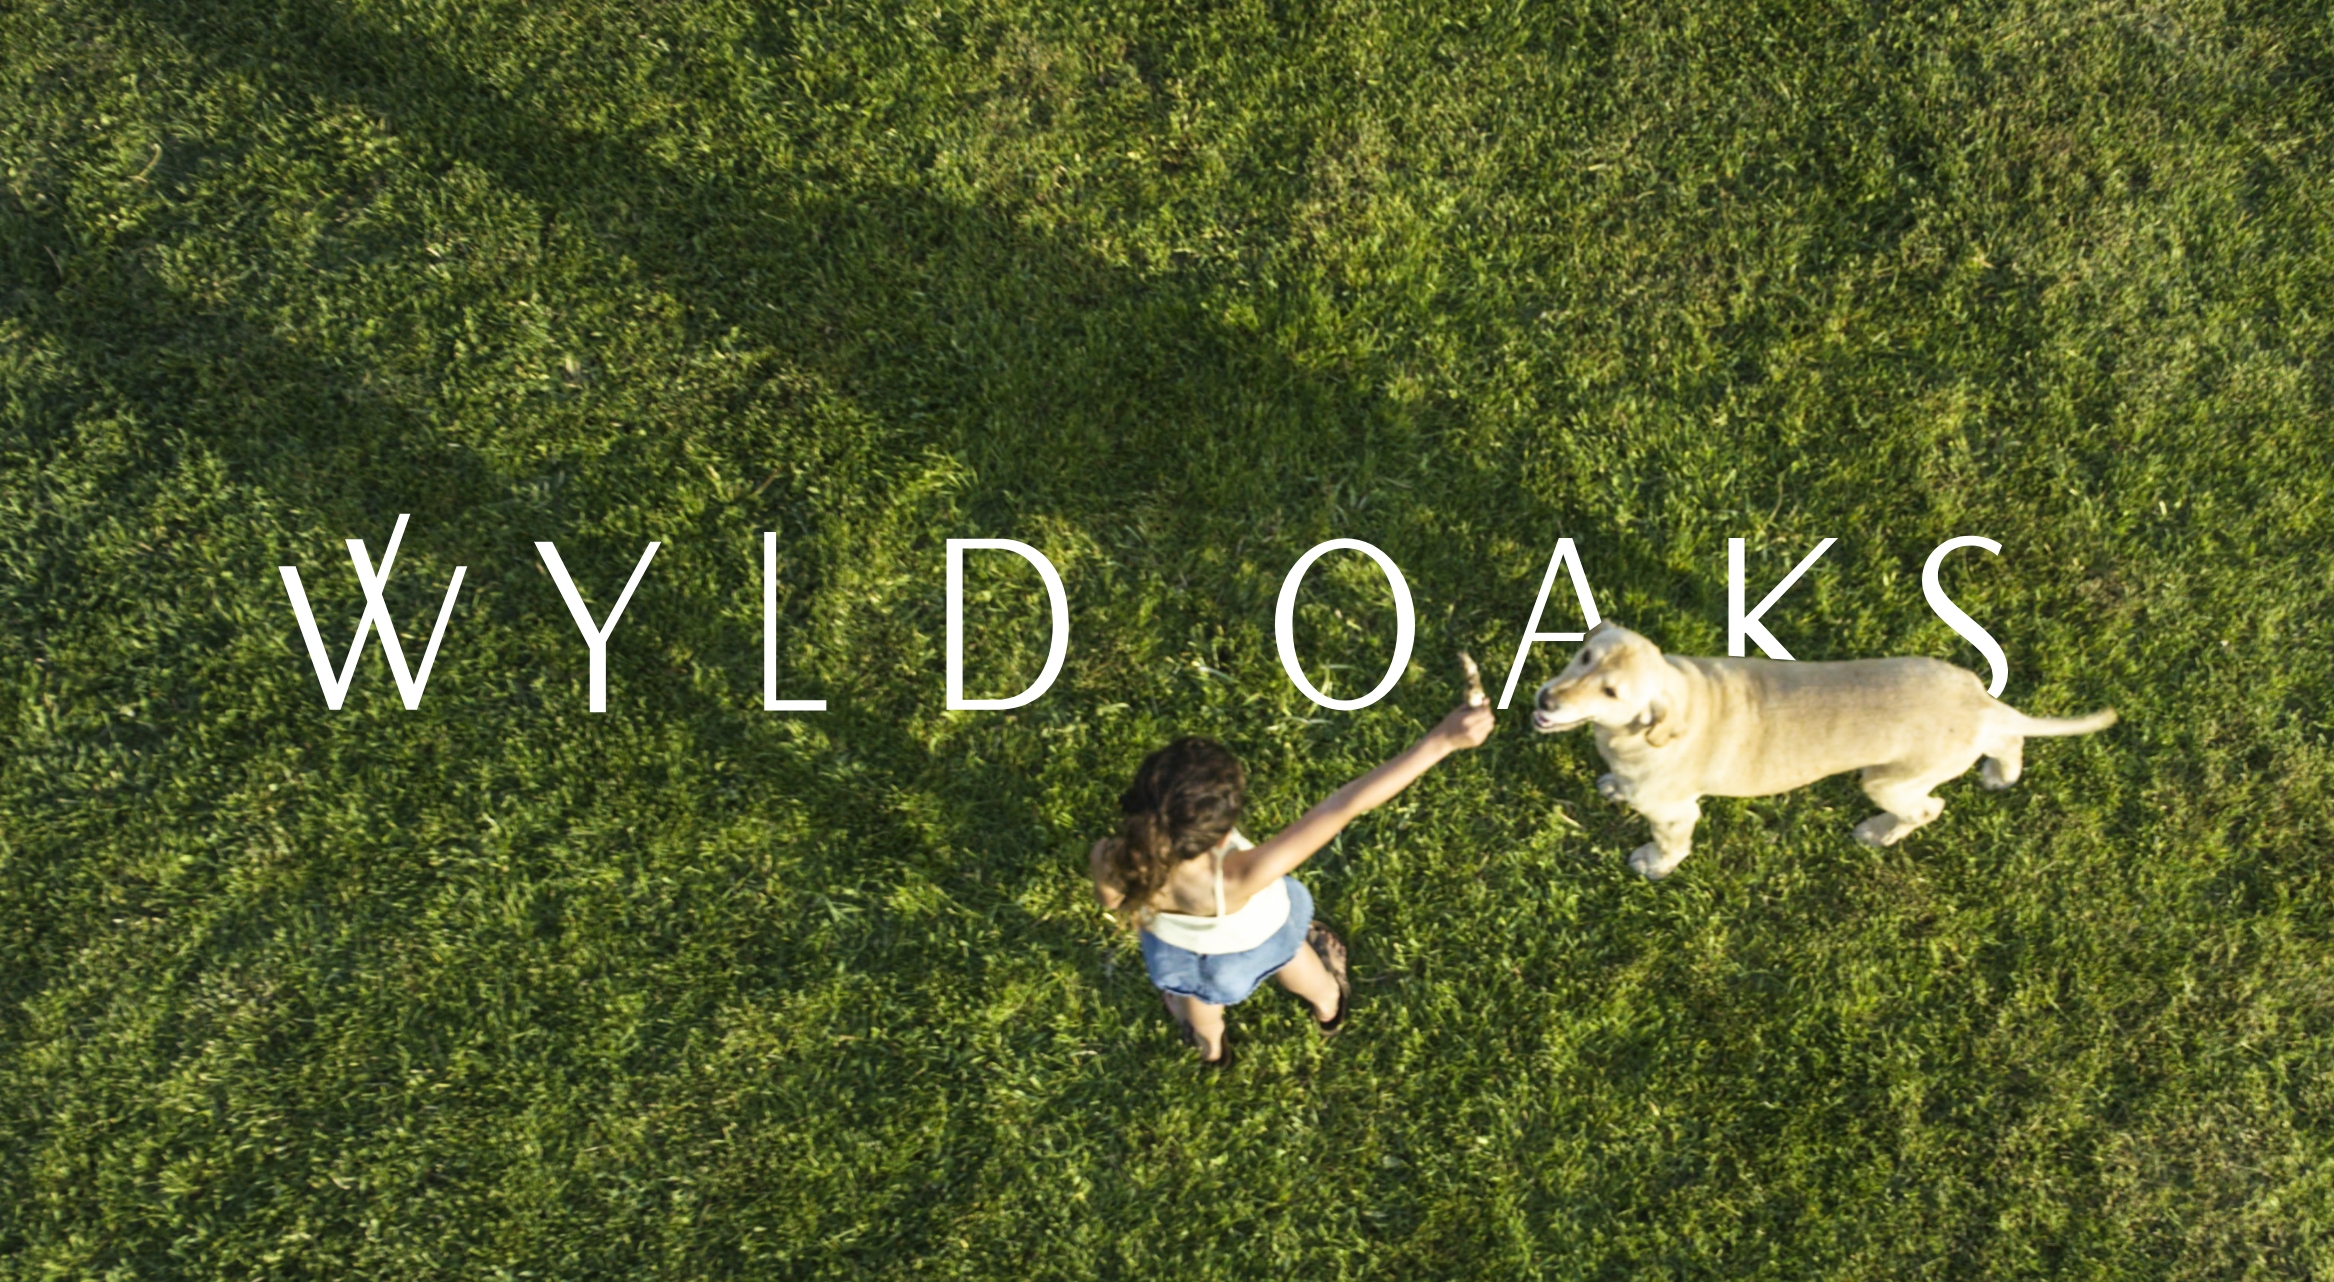 girl playing with her dog with Wyld Oaks logo in the background over the grass